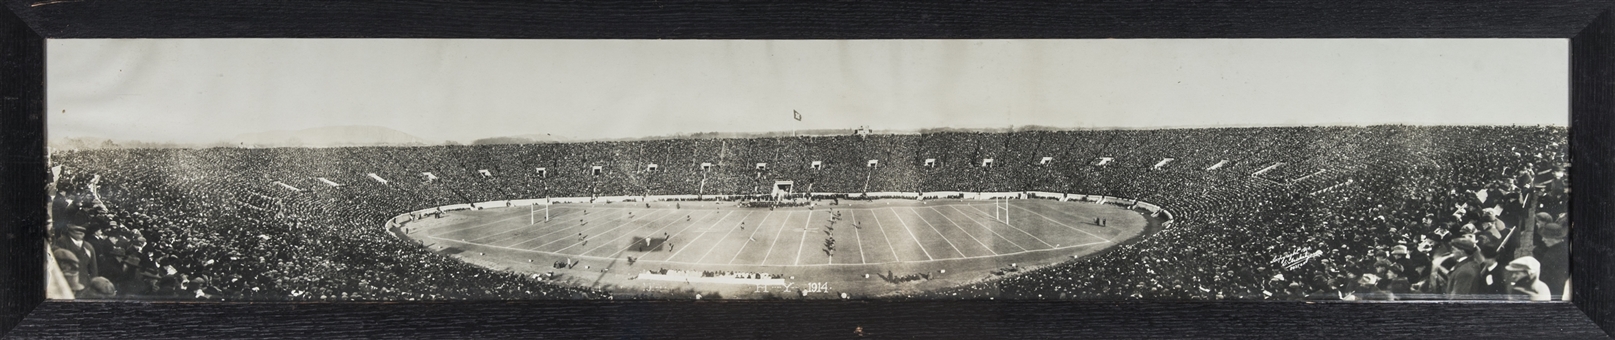 1914 Harvard vs. Yale Action Photo Of Grand Opening of Yale Bowl In 53x10 Framed Display